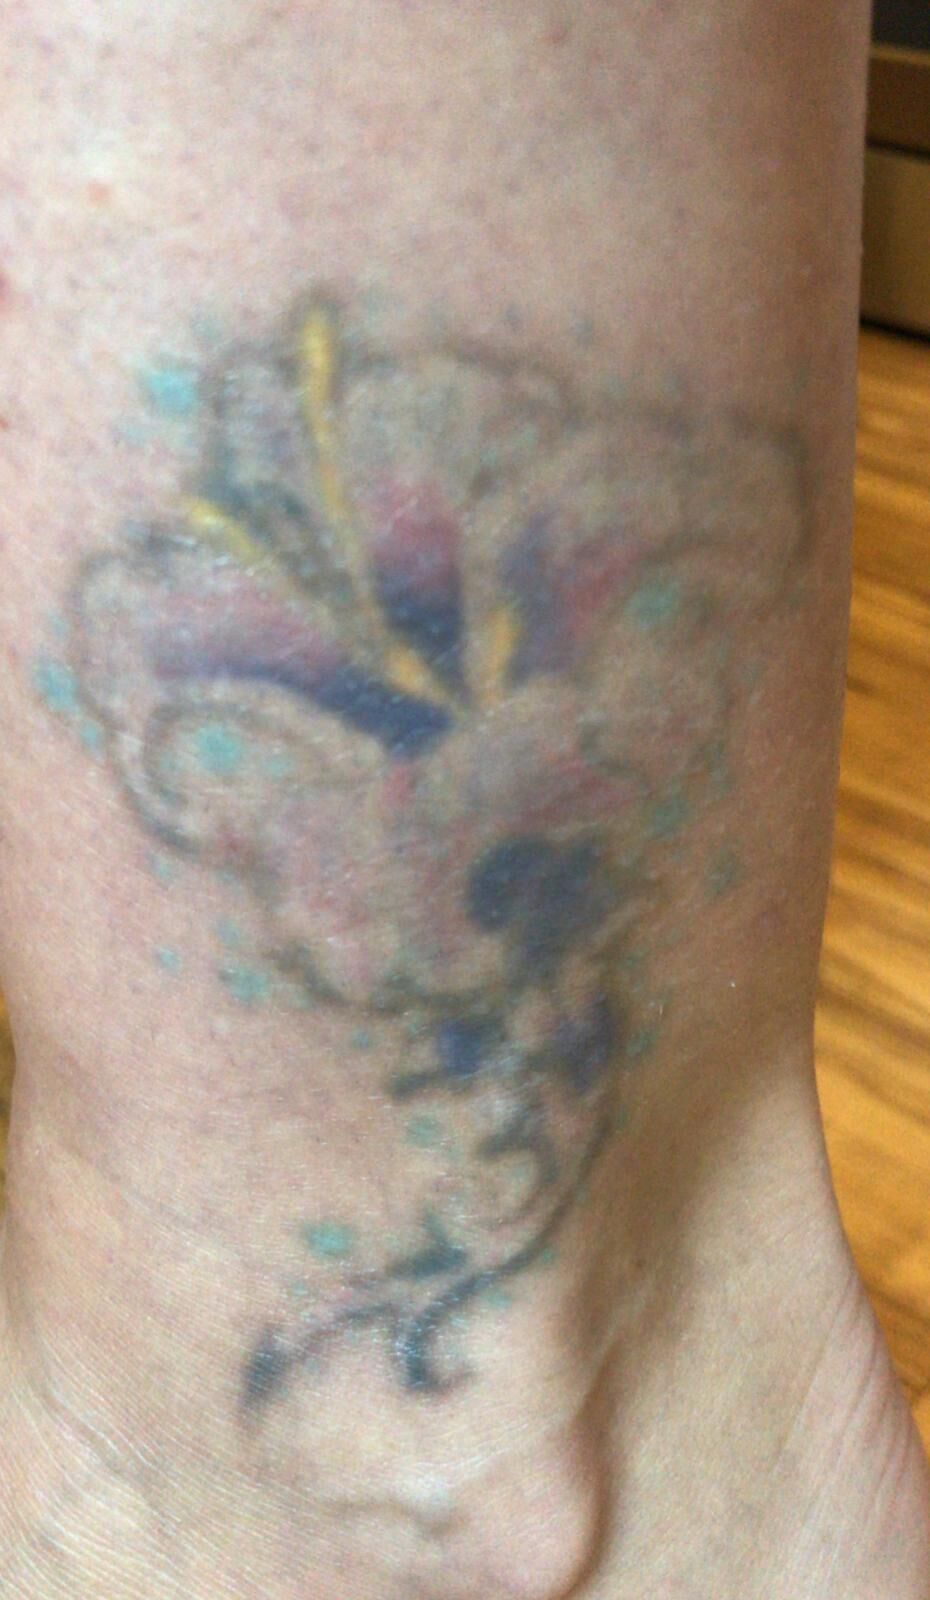 BEFORE  AFTER LASER TATTOO REMOVAL  7049A S Desert Blvd El Paso Texas   Tattoo Removal  Phone Number  Yelp